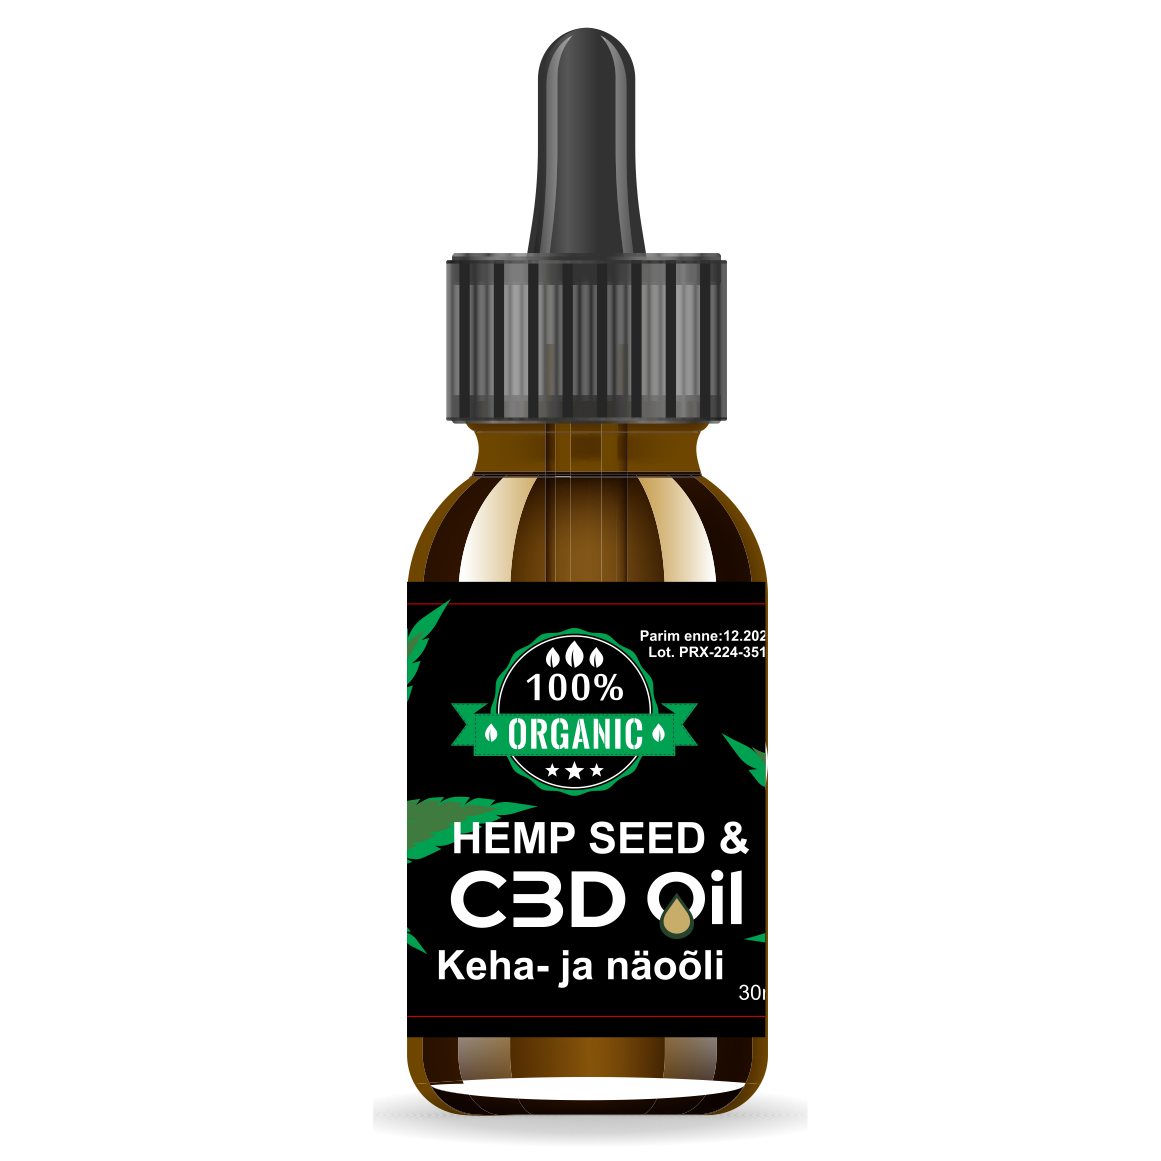 HEMP SEED & CBD OIL For Body And Face